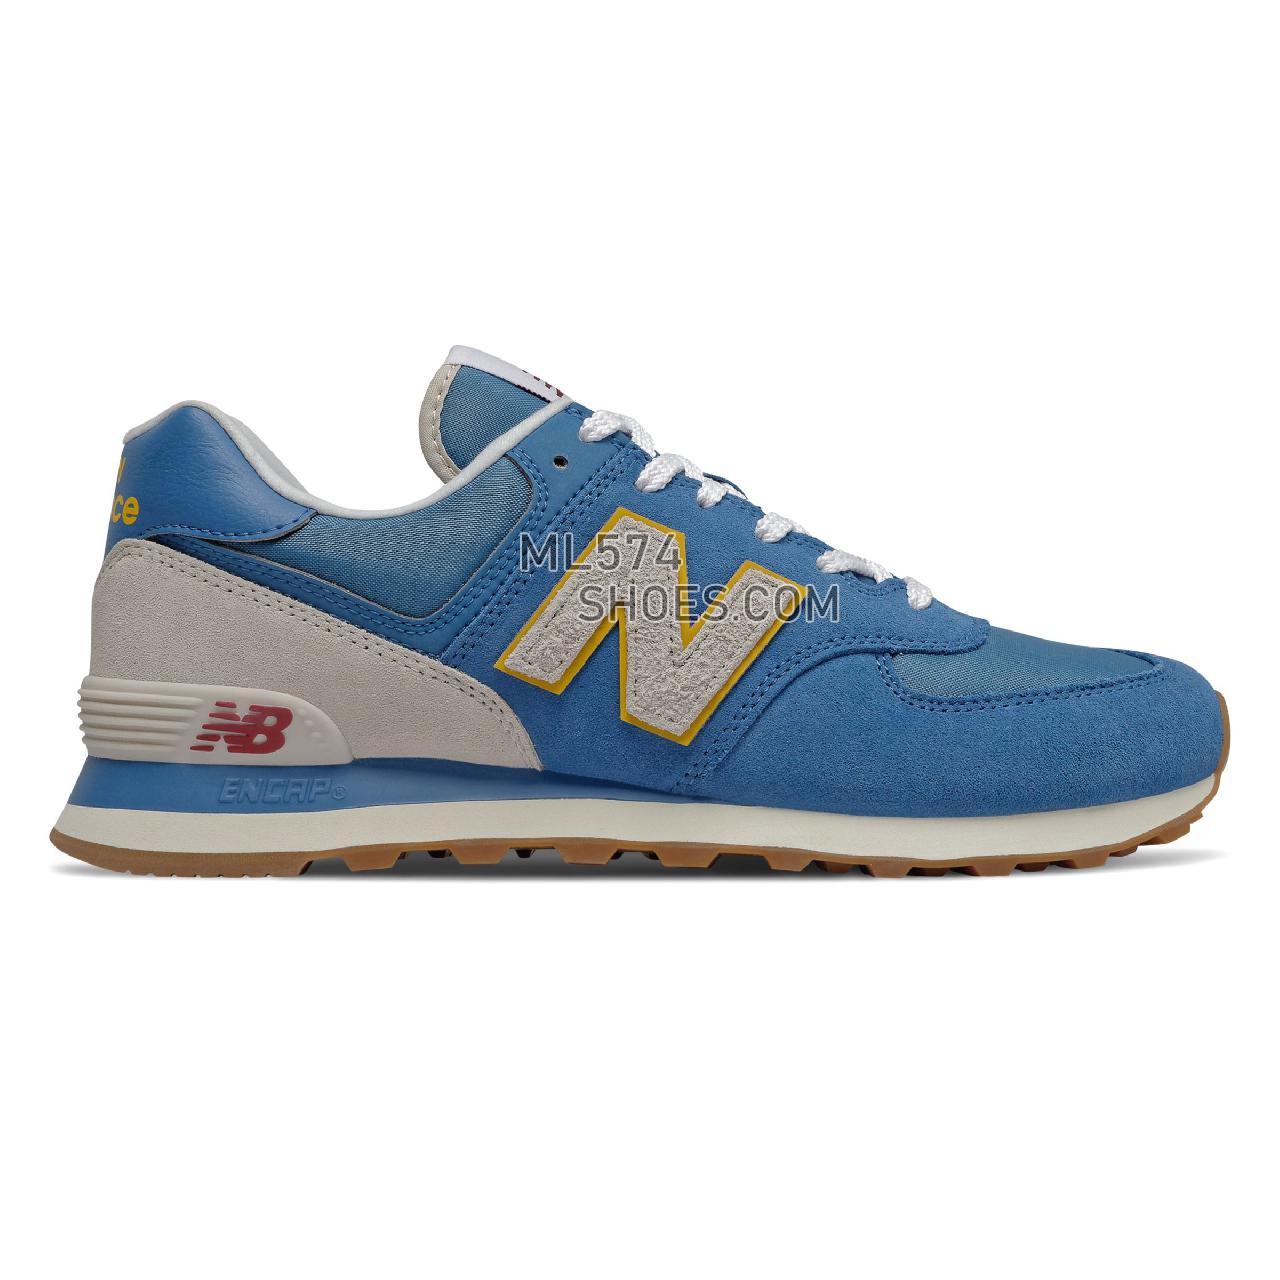 New Balance 574v2 - Men's Classic Sneakers - Mako Blue with Chromatic Yellow - ML574SCA